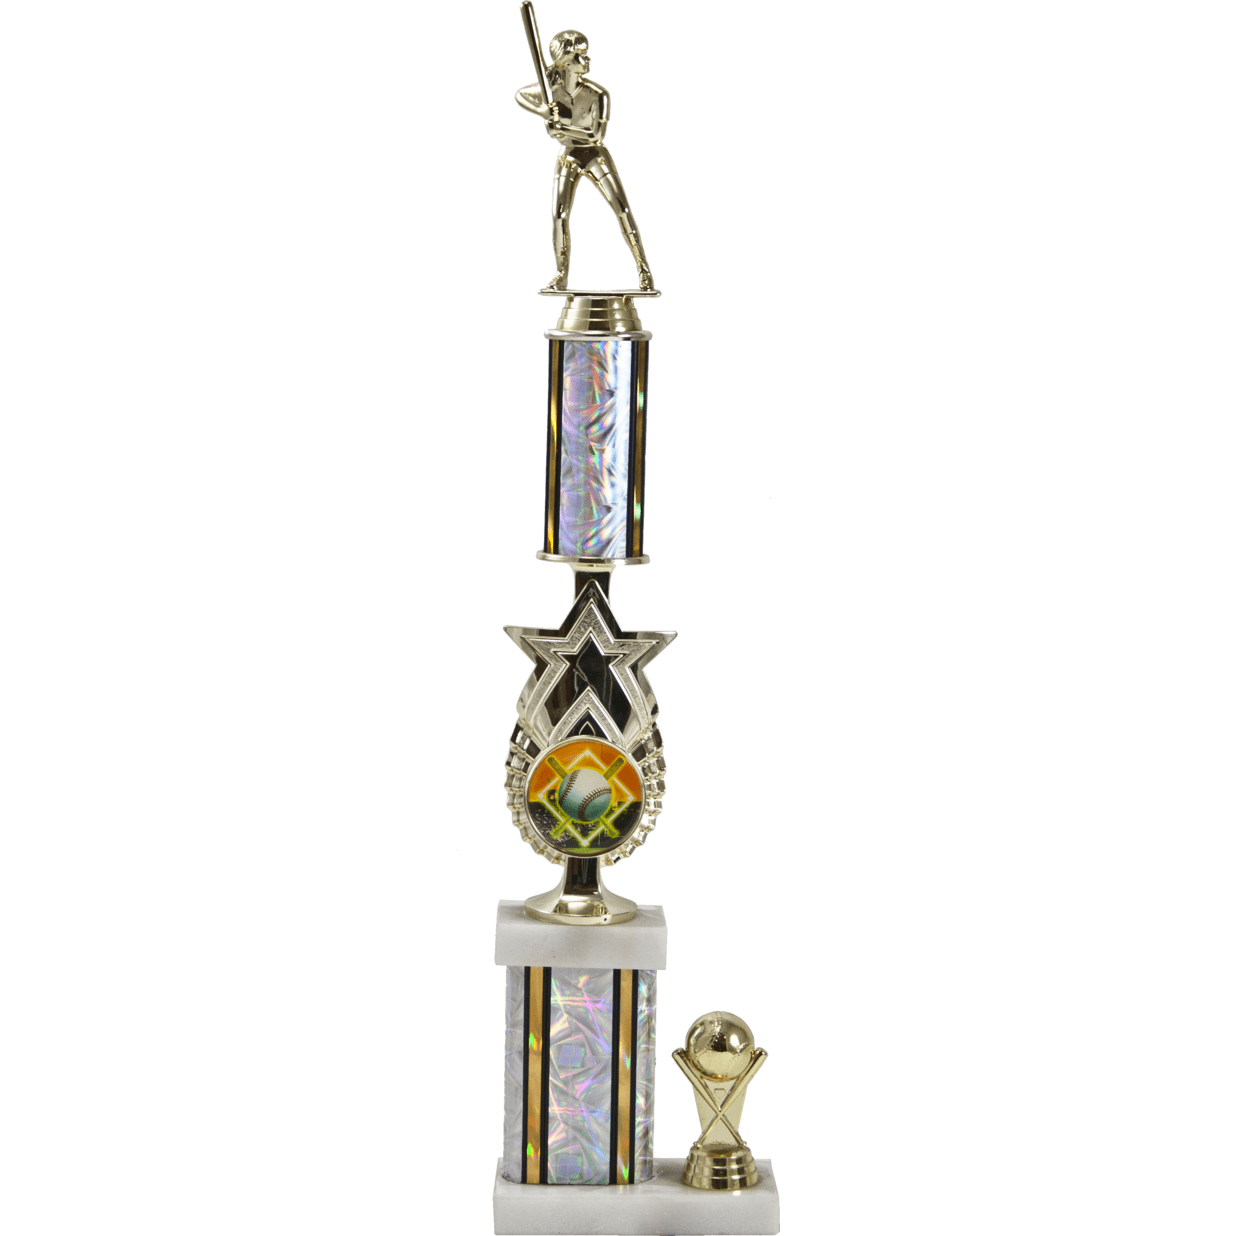 Two-Tier Trophy With Star Riser | Alliance Awards LLC.